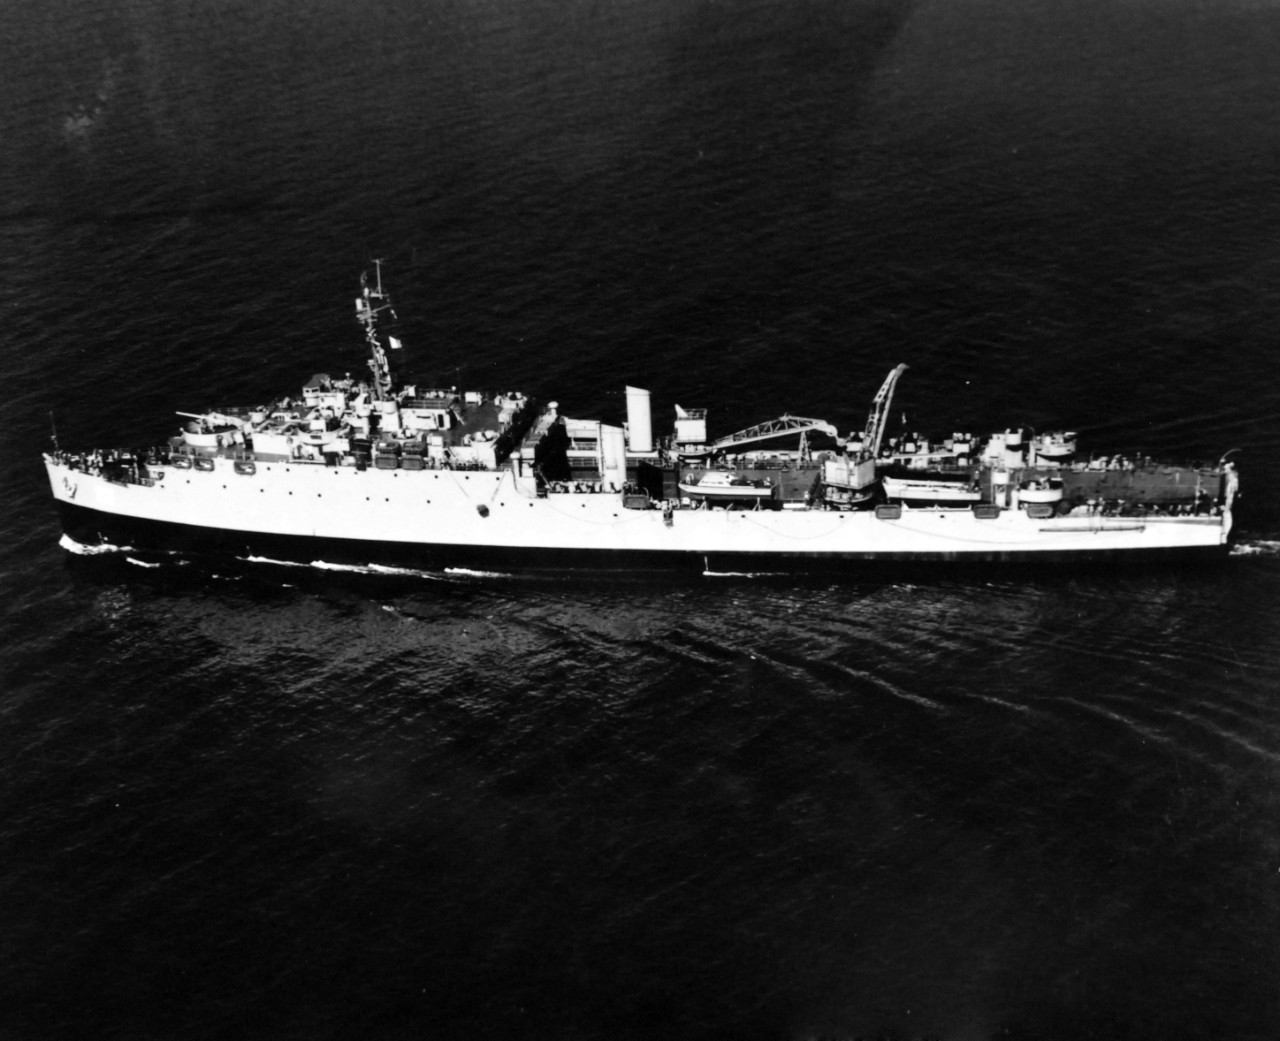 80-G-441736:  USS Fort Marion (LSD-22), 1952.  Port beam, March 26, 1952. Official U.S. Navy Photograph, now in the collections of the National Archives.  (2017/11/01).  